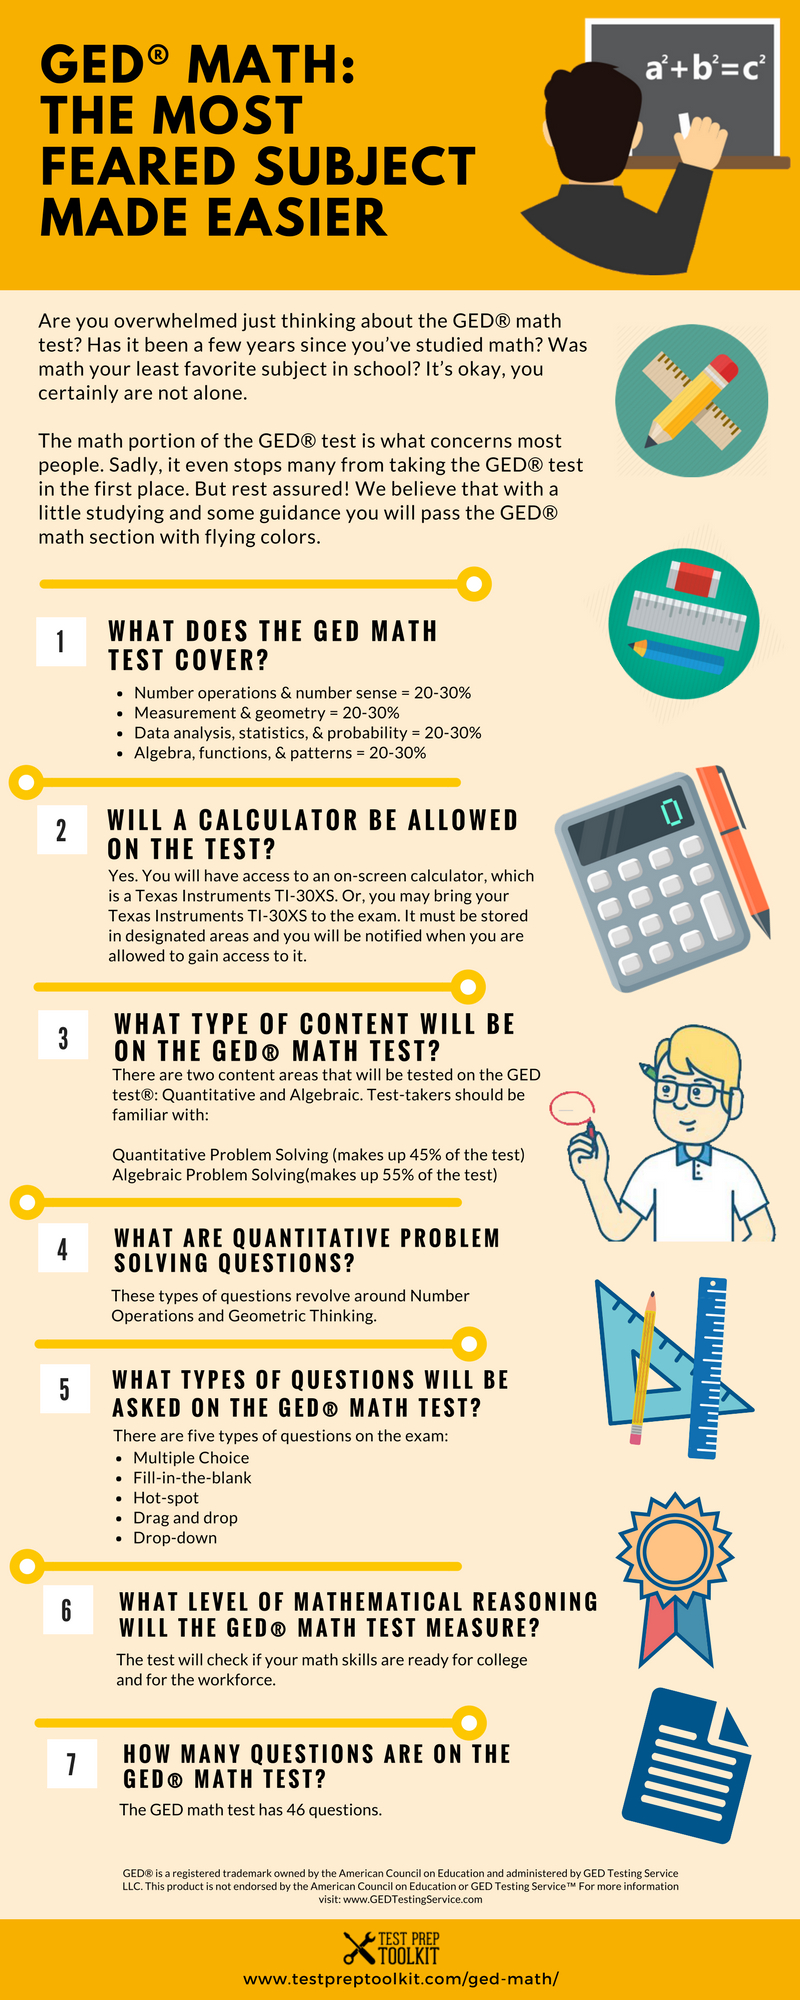 Ged Math Test Guide - 2019 Ged Study Guide | Ged Test Prep | Ged - Free Printable Ged Study Guide 2016